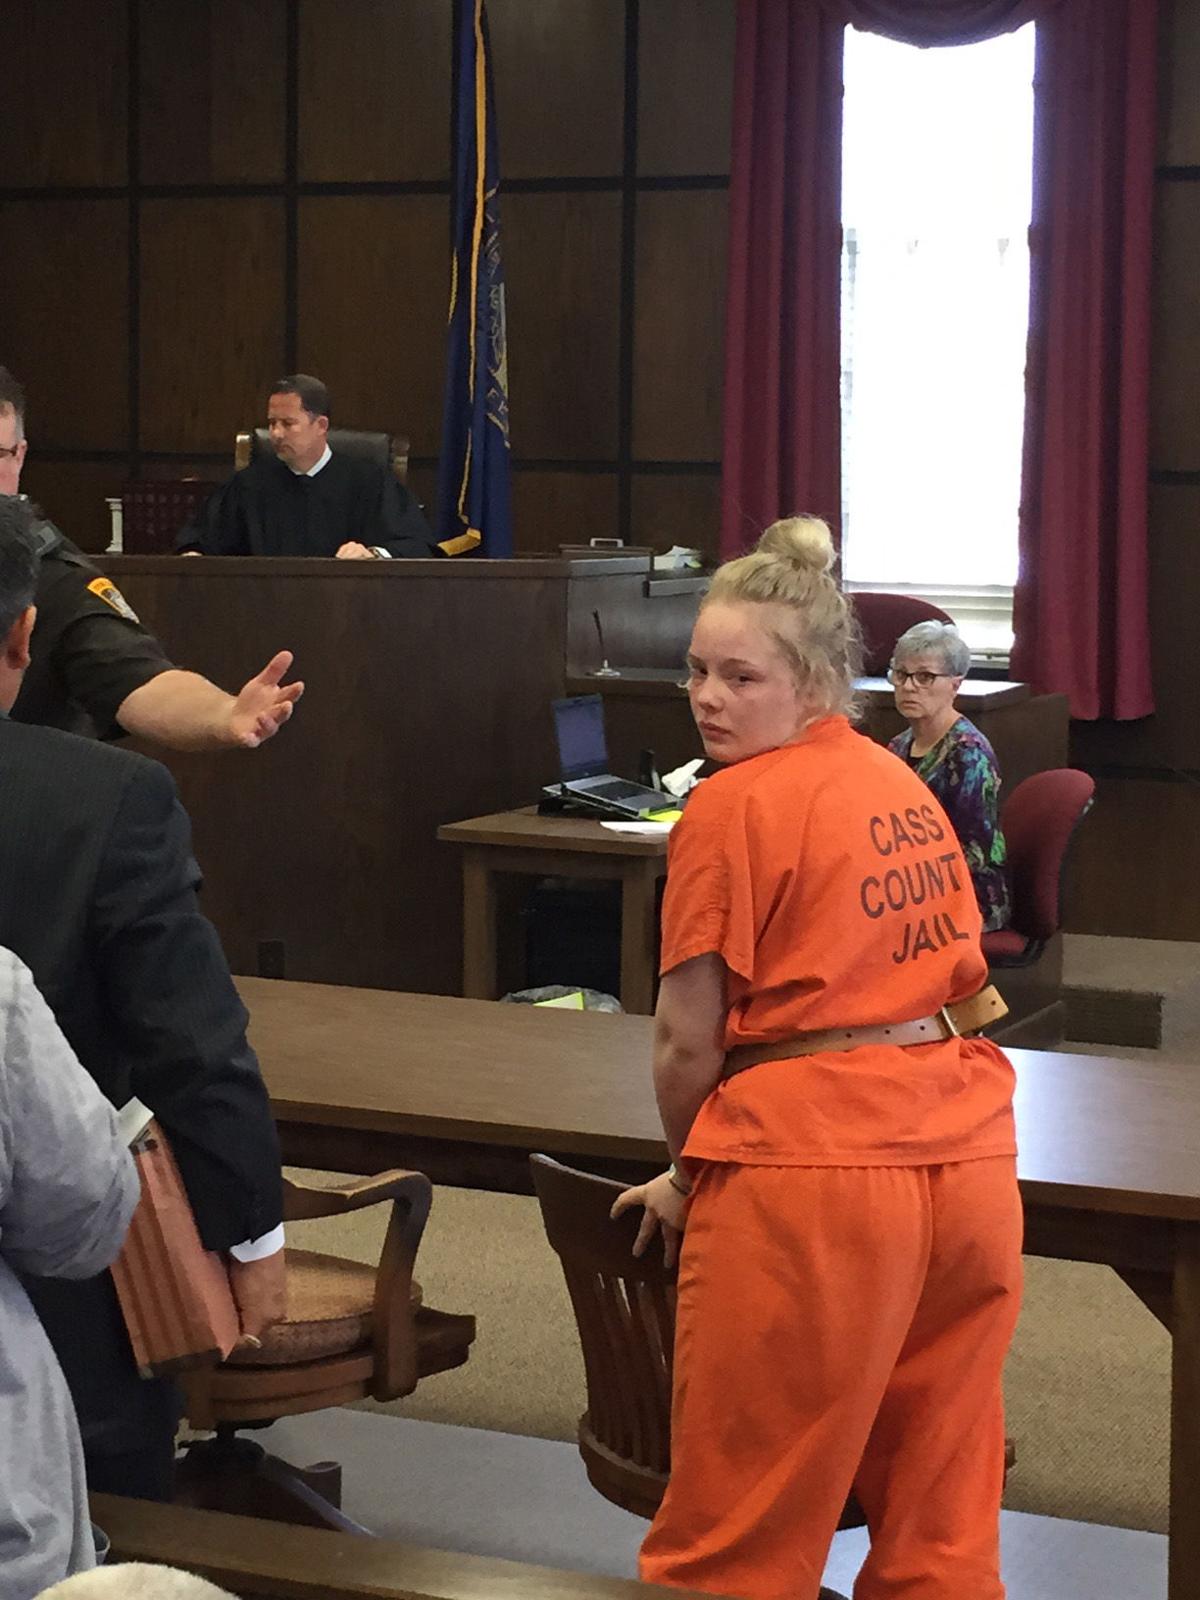 Nebraska City Teen Pleads Guilty To Killing Rival By Running Her Over With Pickup Truck Crime